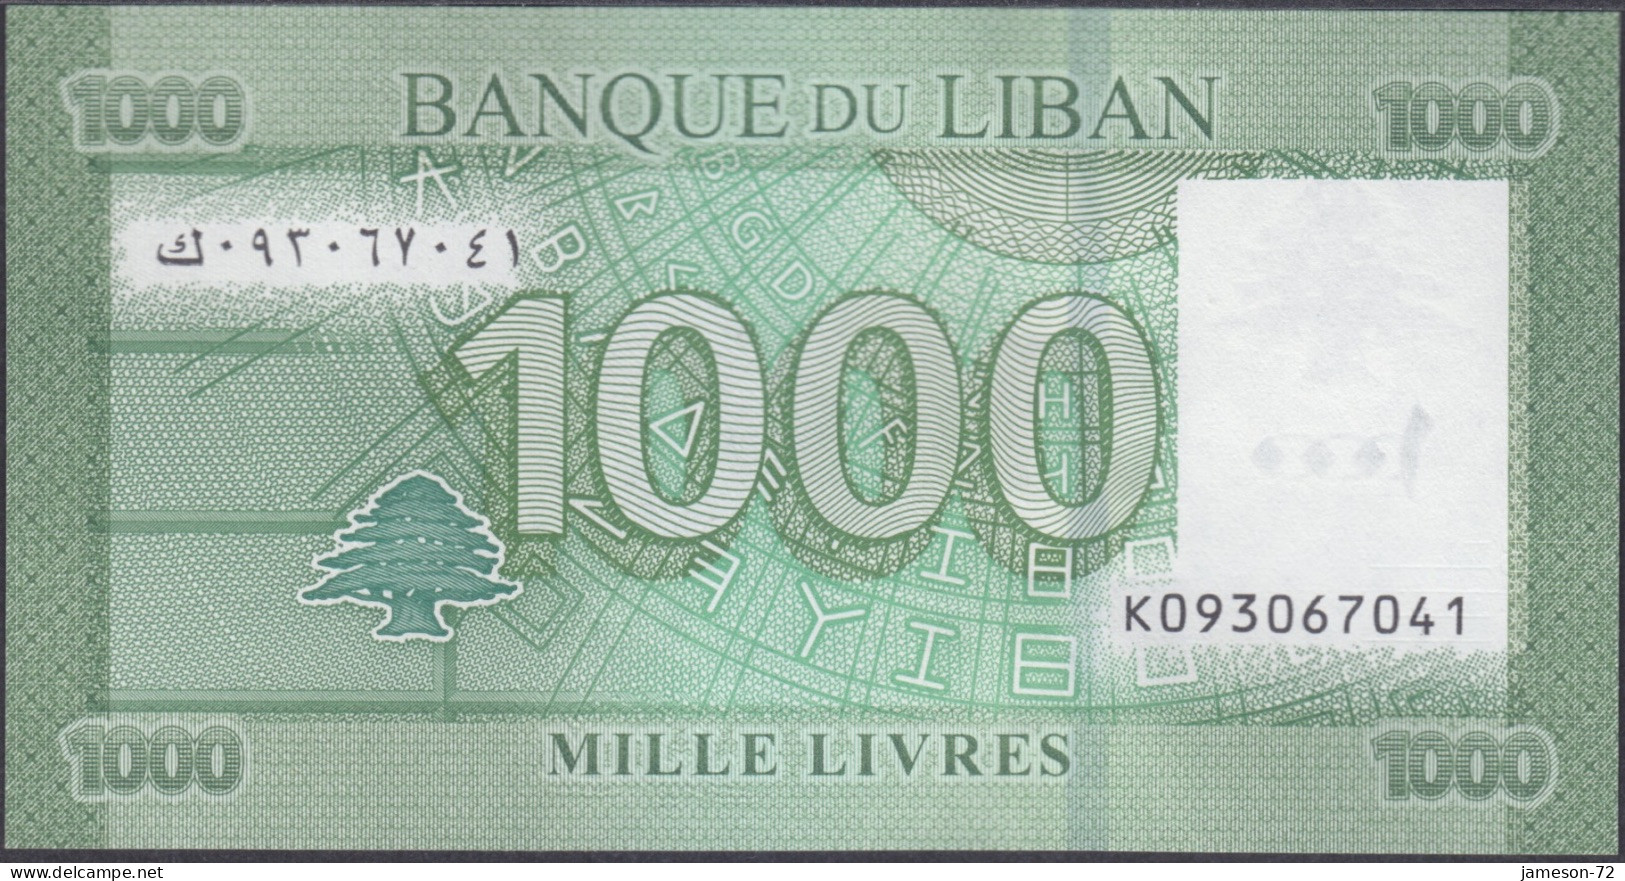 LEBANON - 1000 Livres 2016 P# 90c Middle East Banknote - Edelweiss Coins - Lebanon